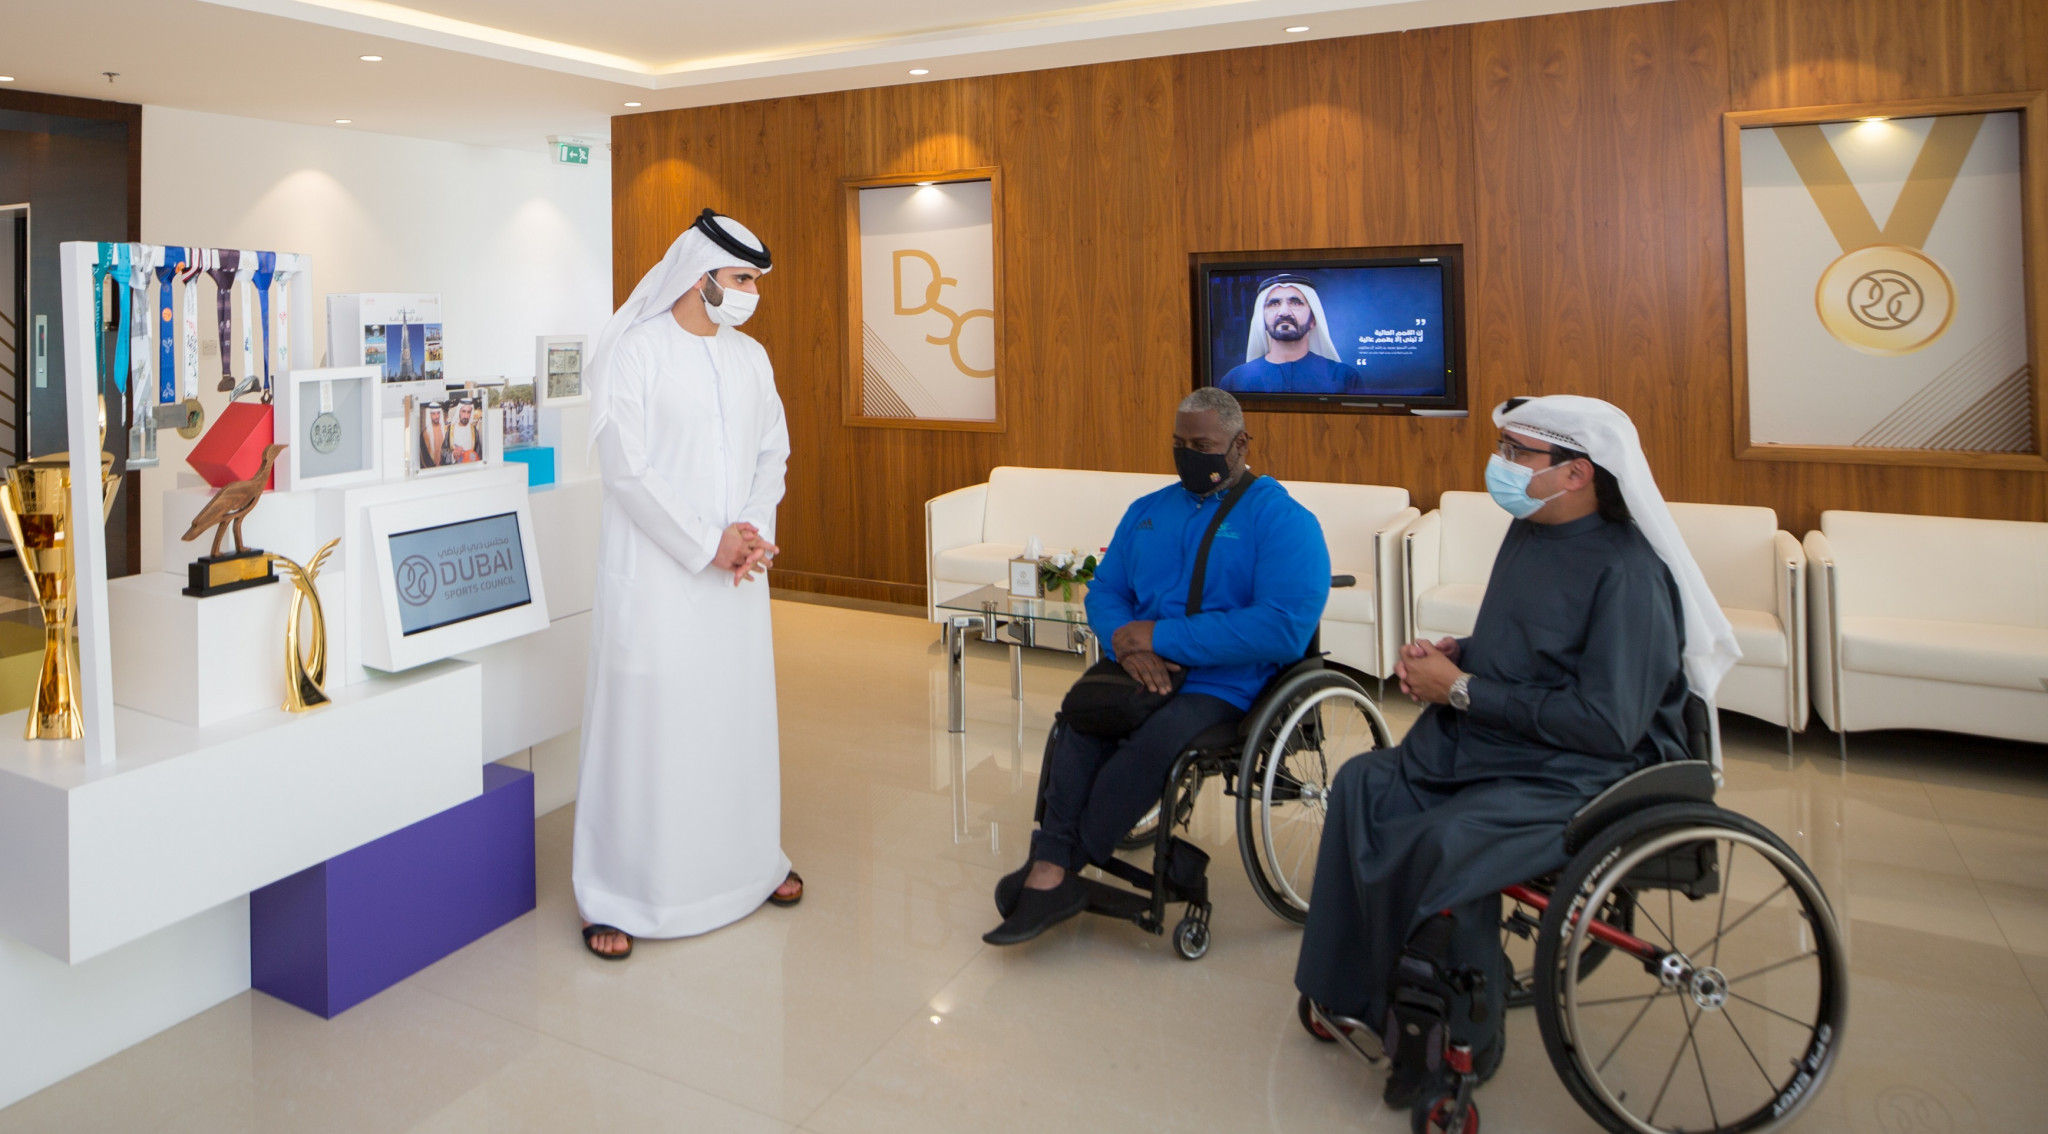 Sheikh Mansoor urges UAE Paralympic champion to continue with achievements